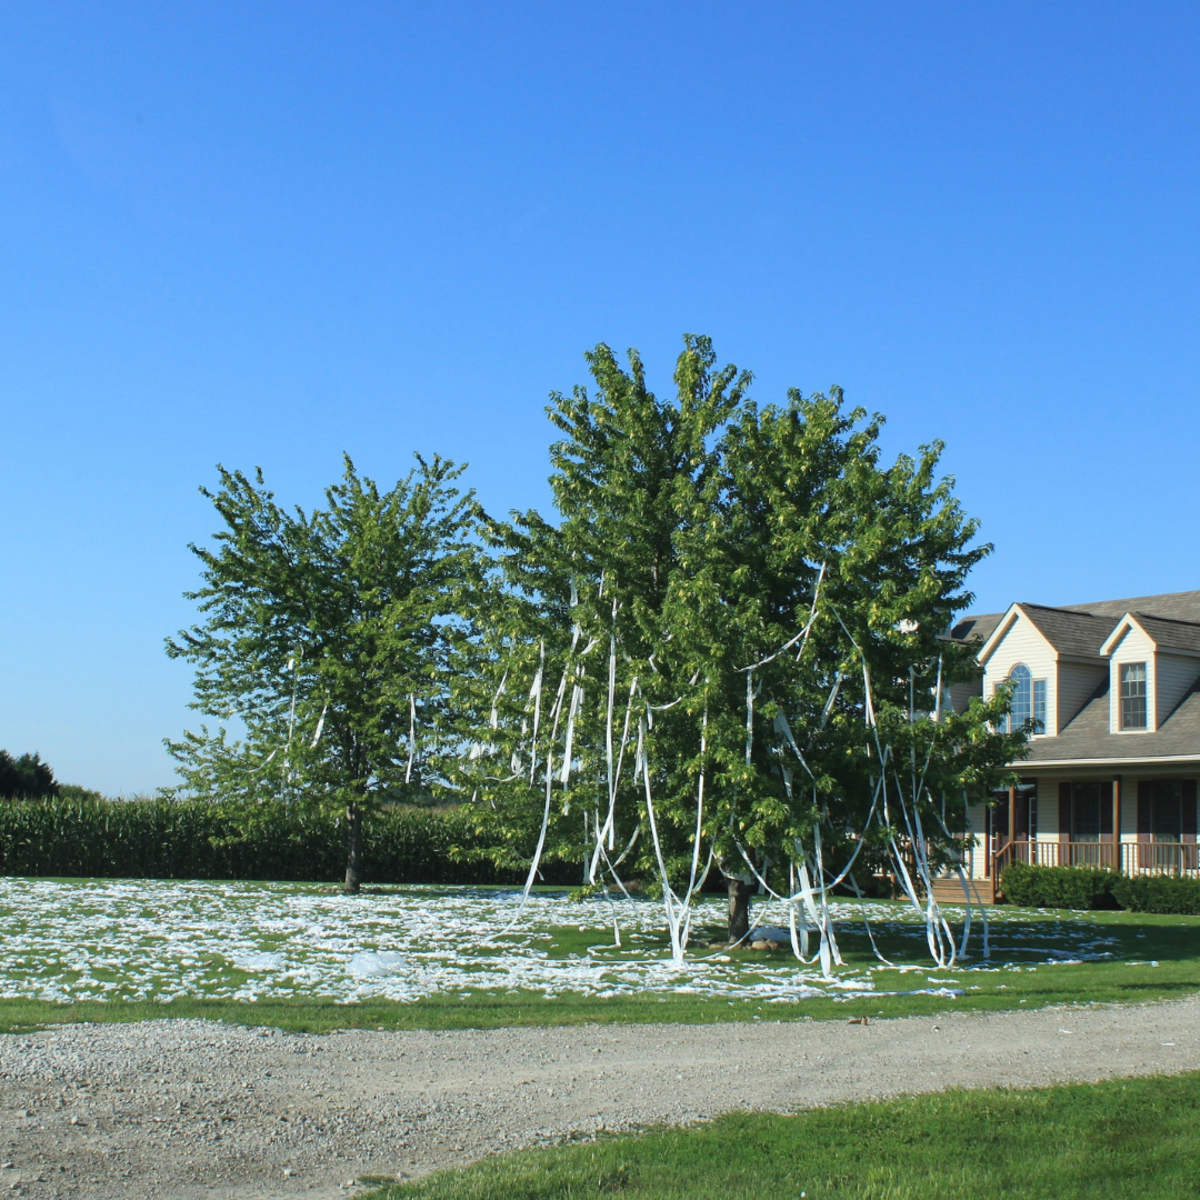 Toilet-papered trees and lawn in Deerfield, Michigan. Toilet papering is a popular American adolescent prank that is often performed on Halloween and April Fool's Day.